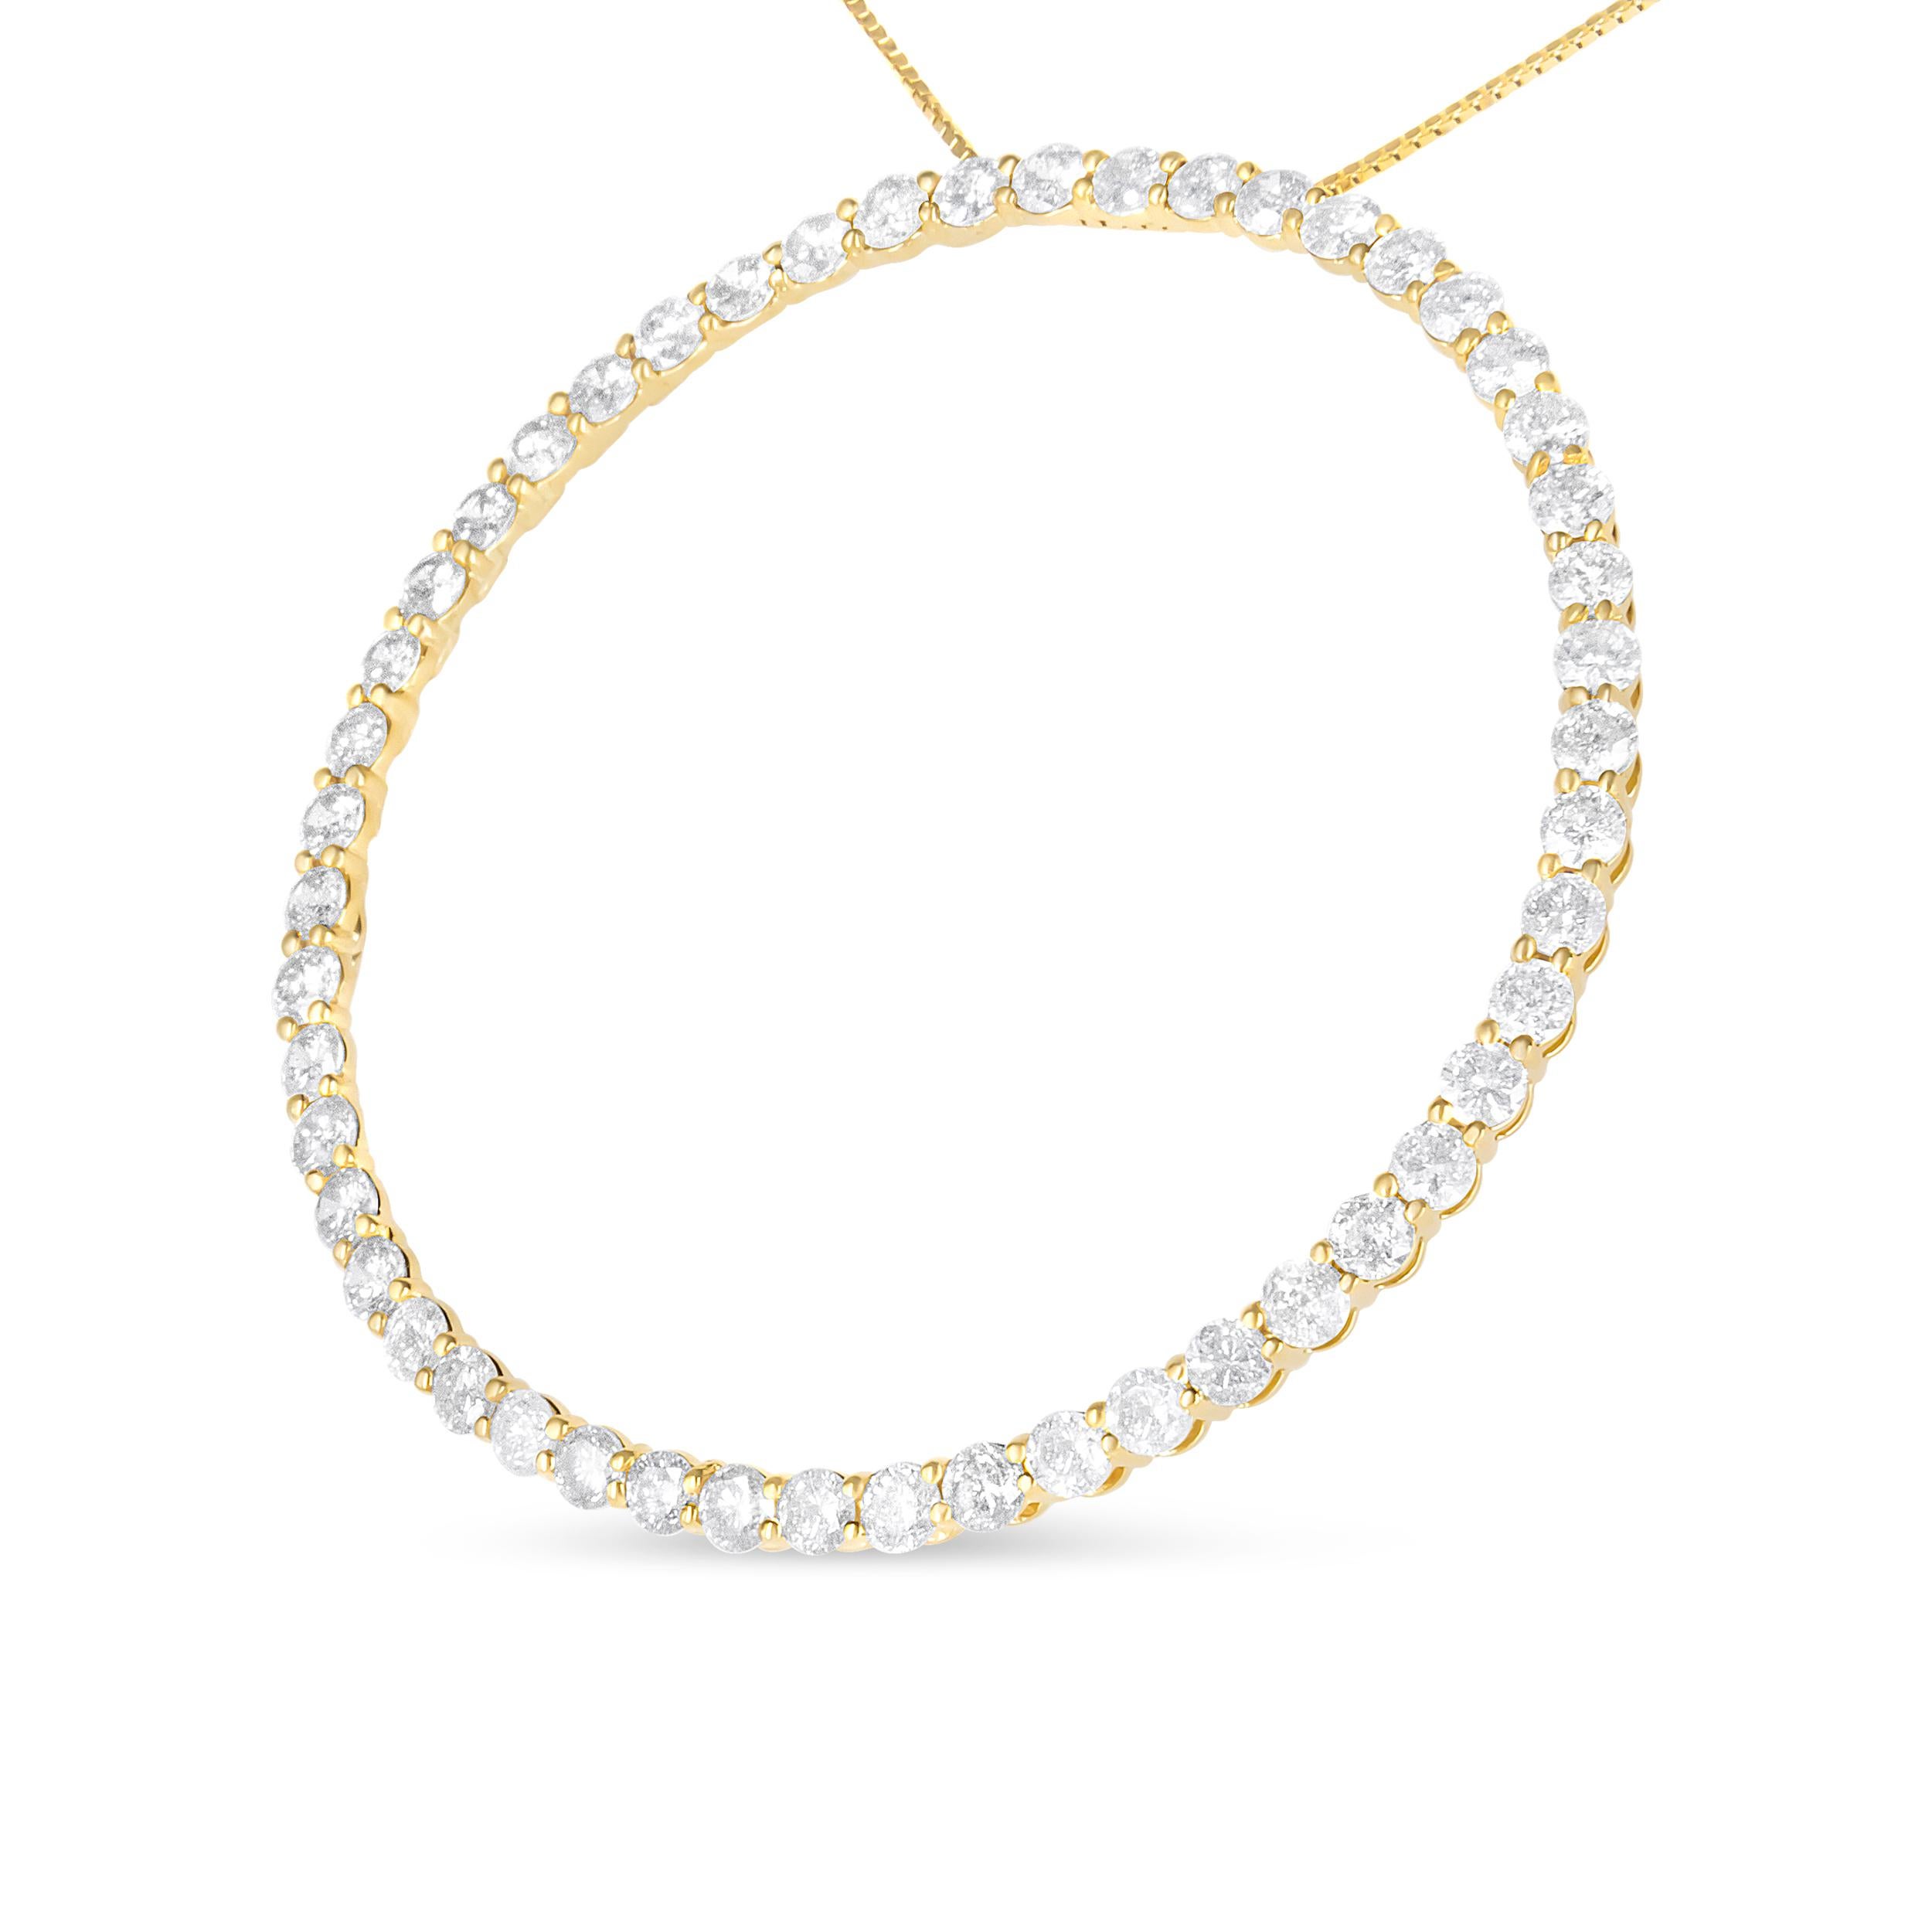 Made to stun, this diamond necklace is truly the one of our dreams. The focal point of the piece lies in the 10K yellow gold-plated .925 Sterling Silver pendant that’s embellished with 50 natural round diamonds in prong setting, totalling to 4 cttw.